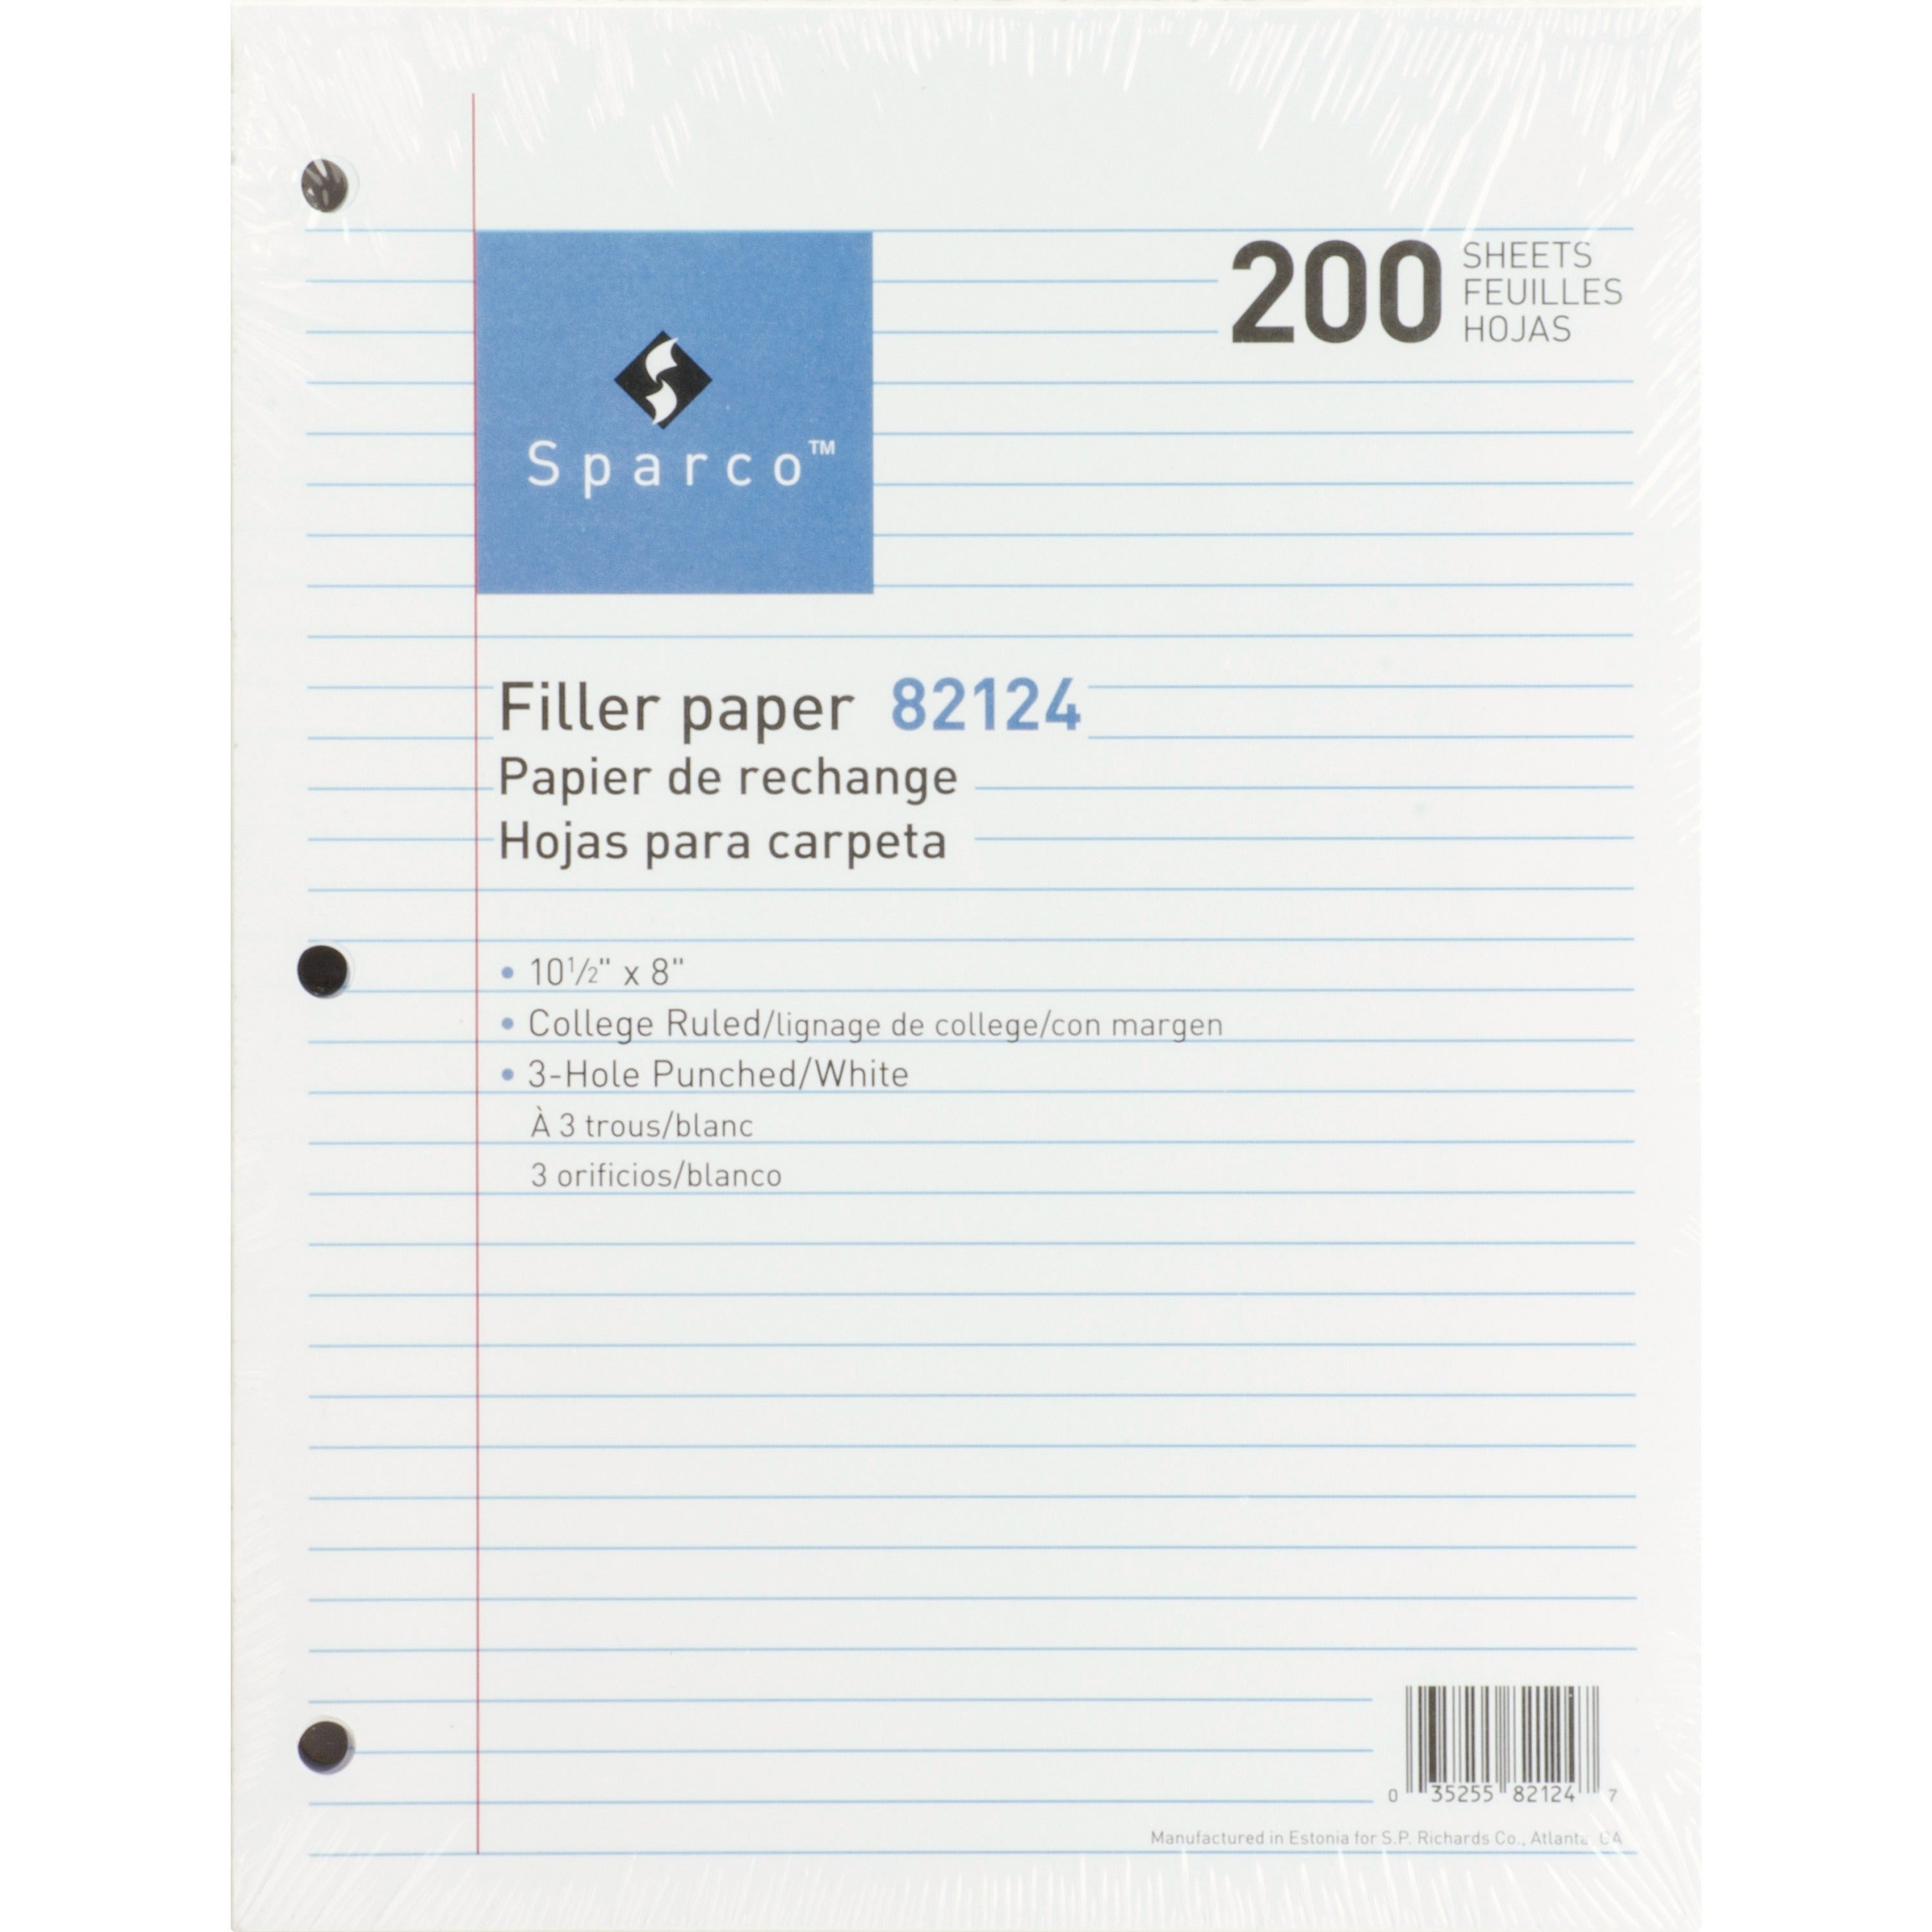 Sparco 3-hole Punched Filler Paper - 200 Sheets - College Ruled - Ruled Red Margin - 16 lb Basis Weight - 8" x 10 1/2" - White Paper - Bleed-free - 200 / Pack - 